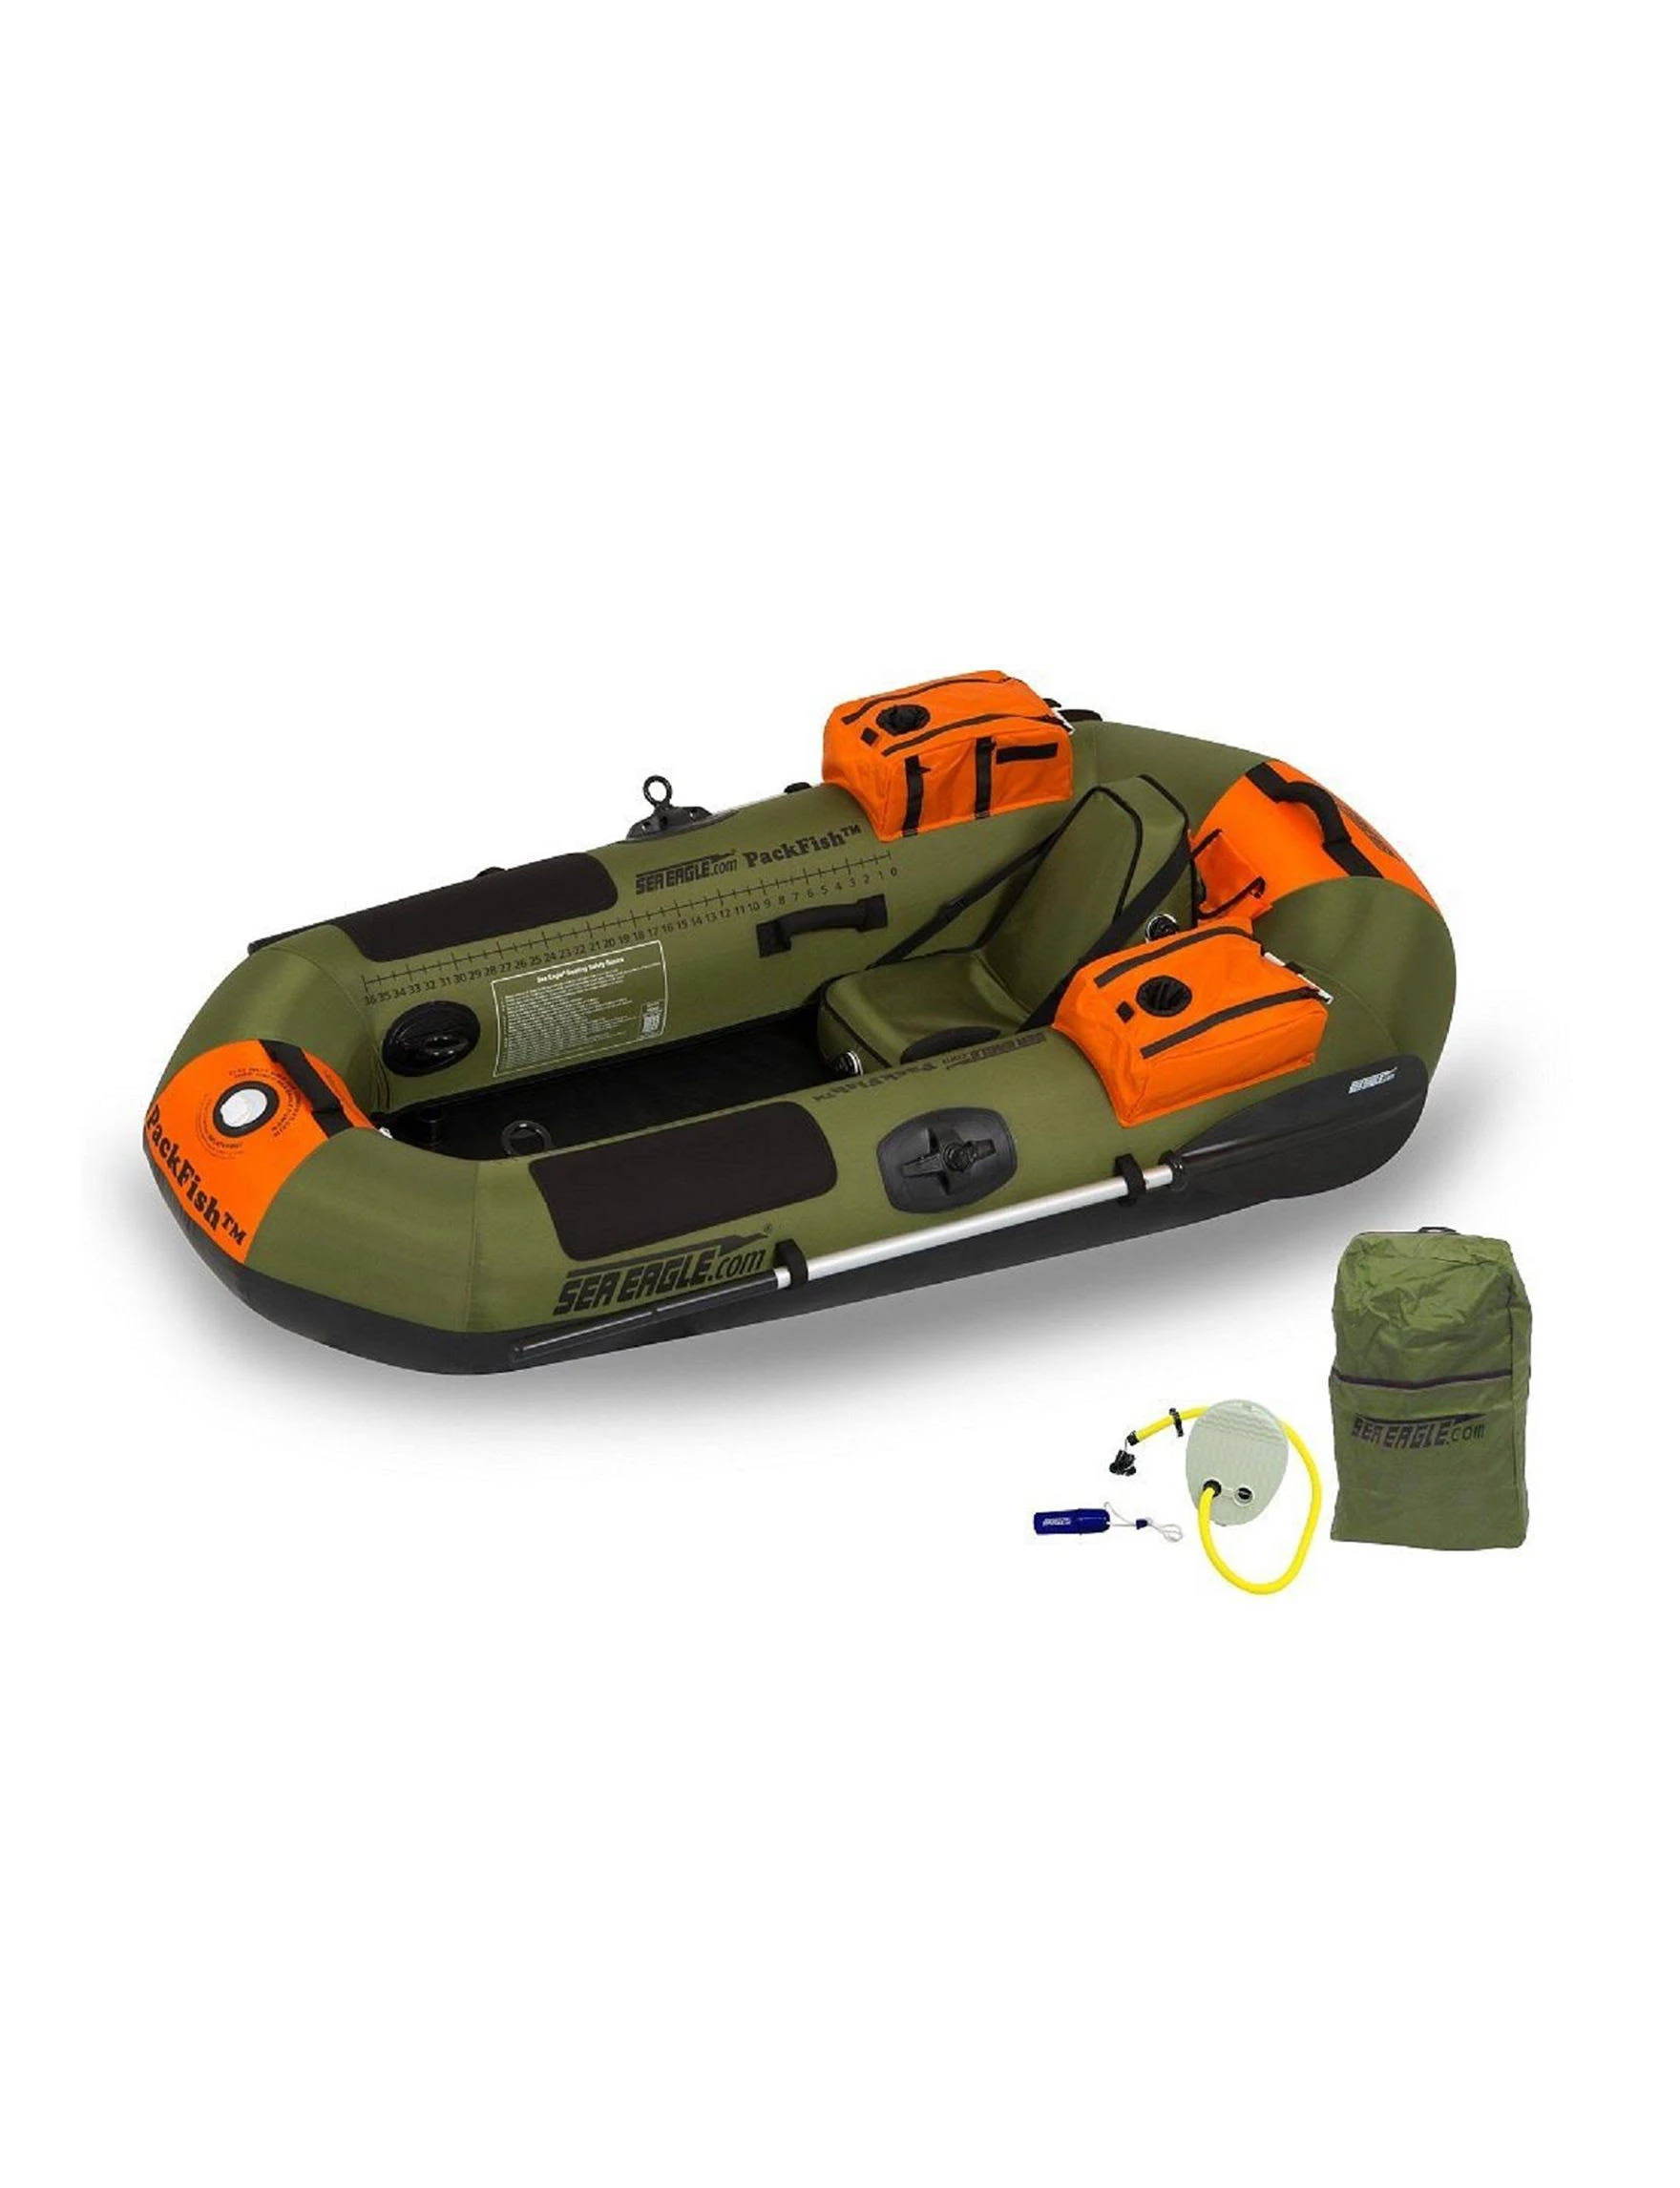 Sea Eagle PackFish7 Inflatable Fishing Boat Deluxe